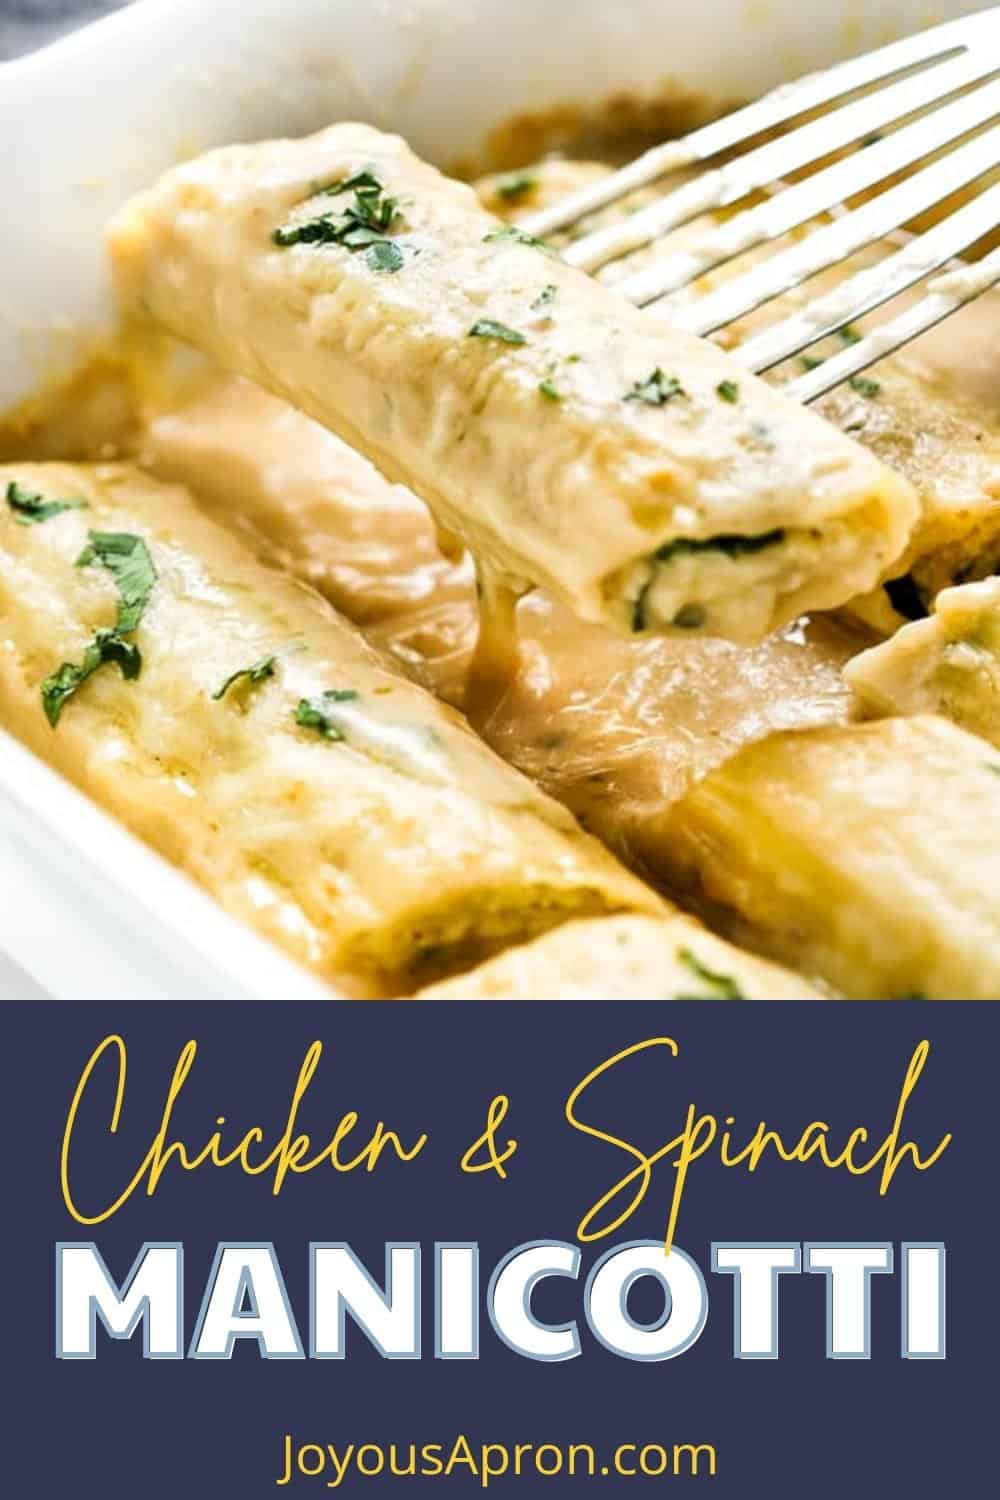 Chicken and Spinach Manicotti - oven baked stuffed Manicotti is a delicious Italian pasta recipe where manicotti is stuffed with a chicken, spinach and cheese filling then topped with creamy Alfredo sauce and more cheese. via @joyousapron